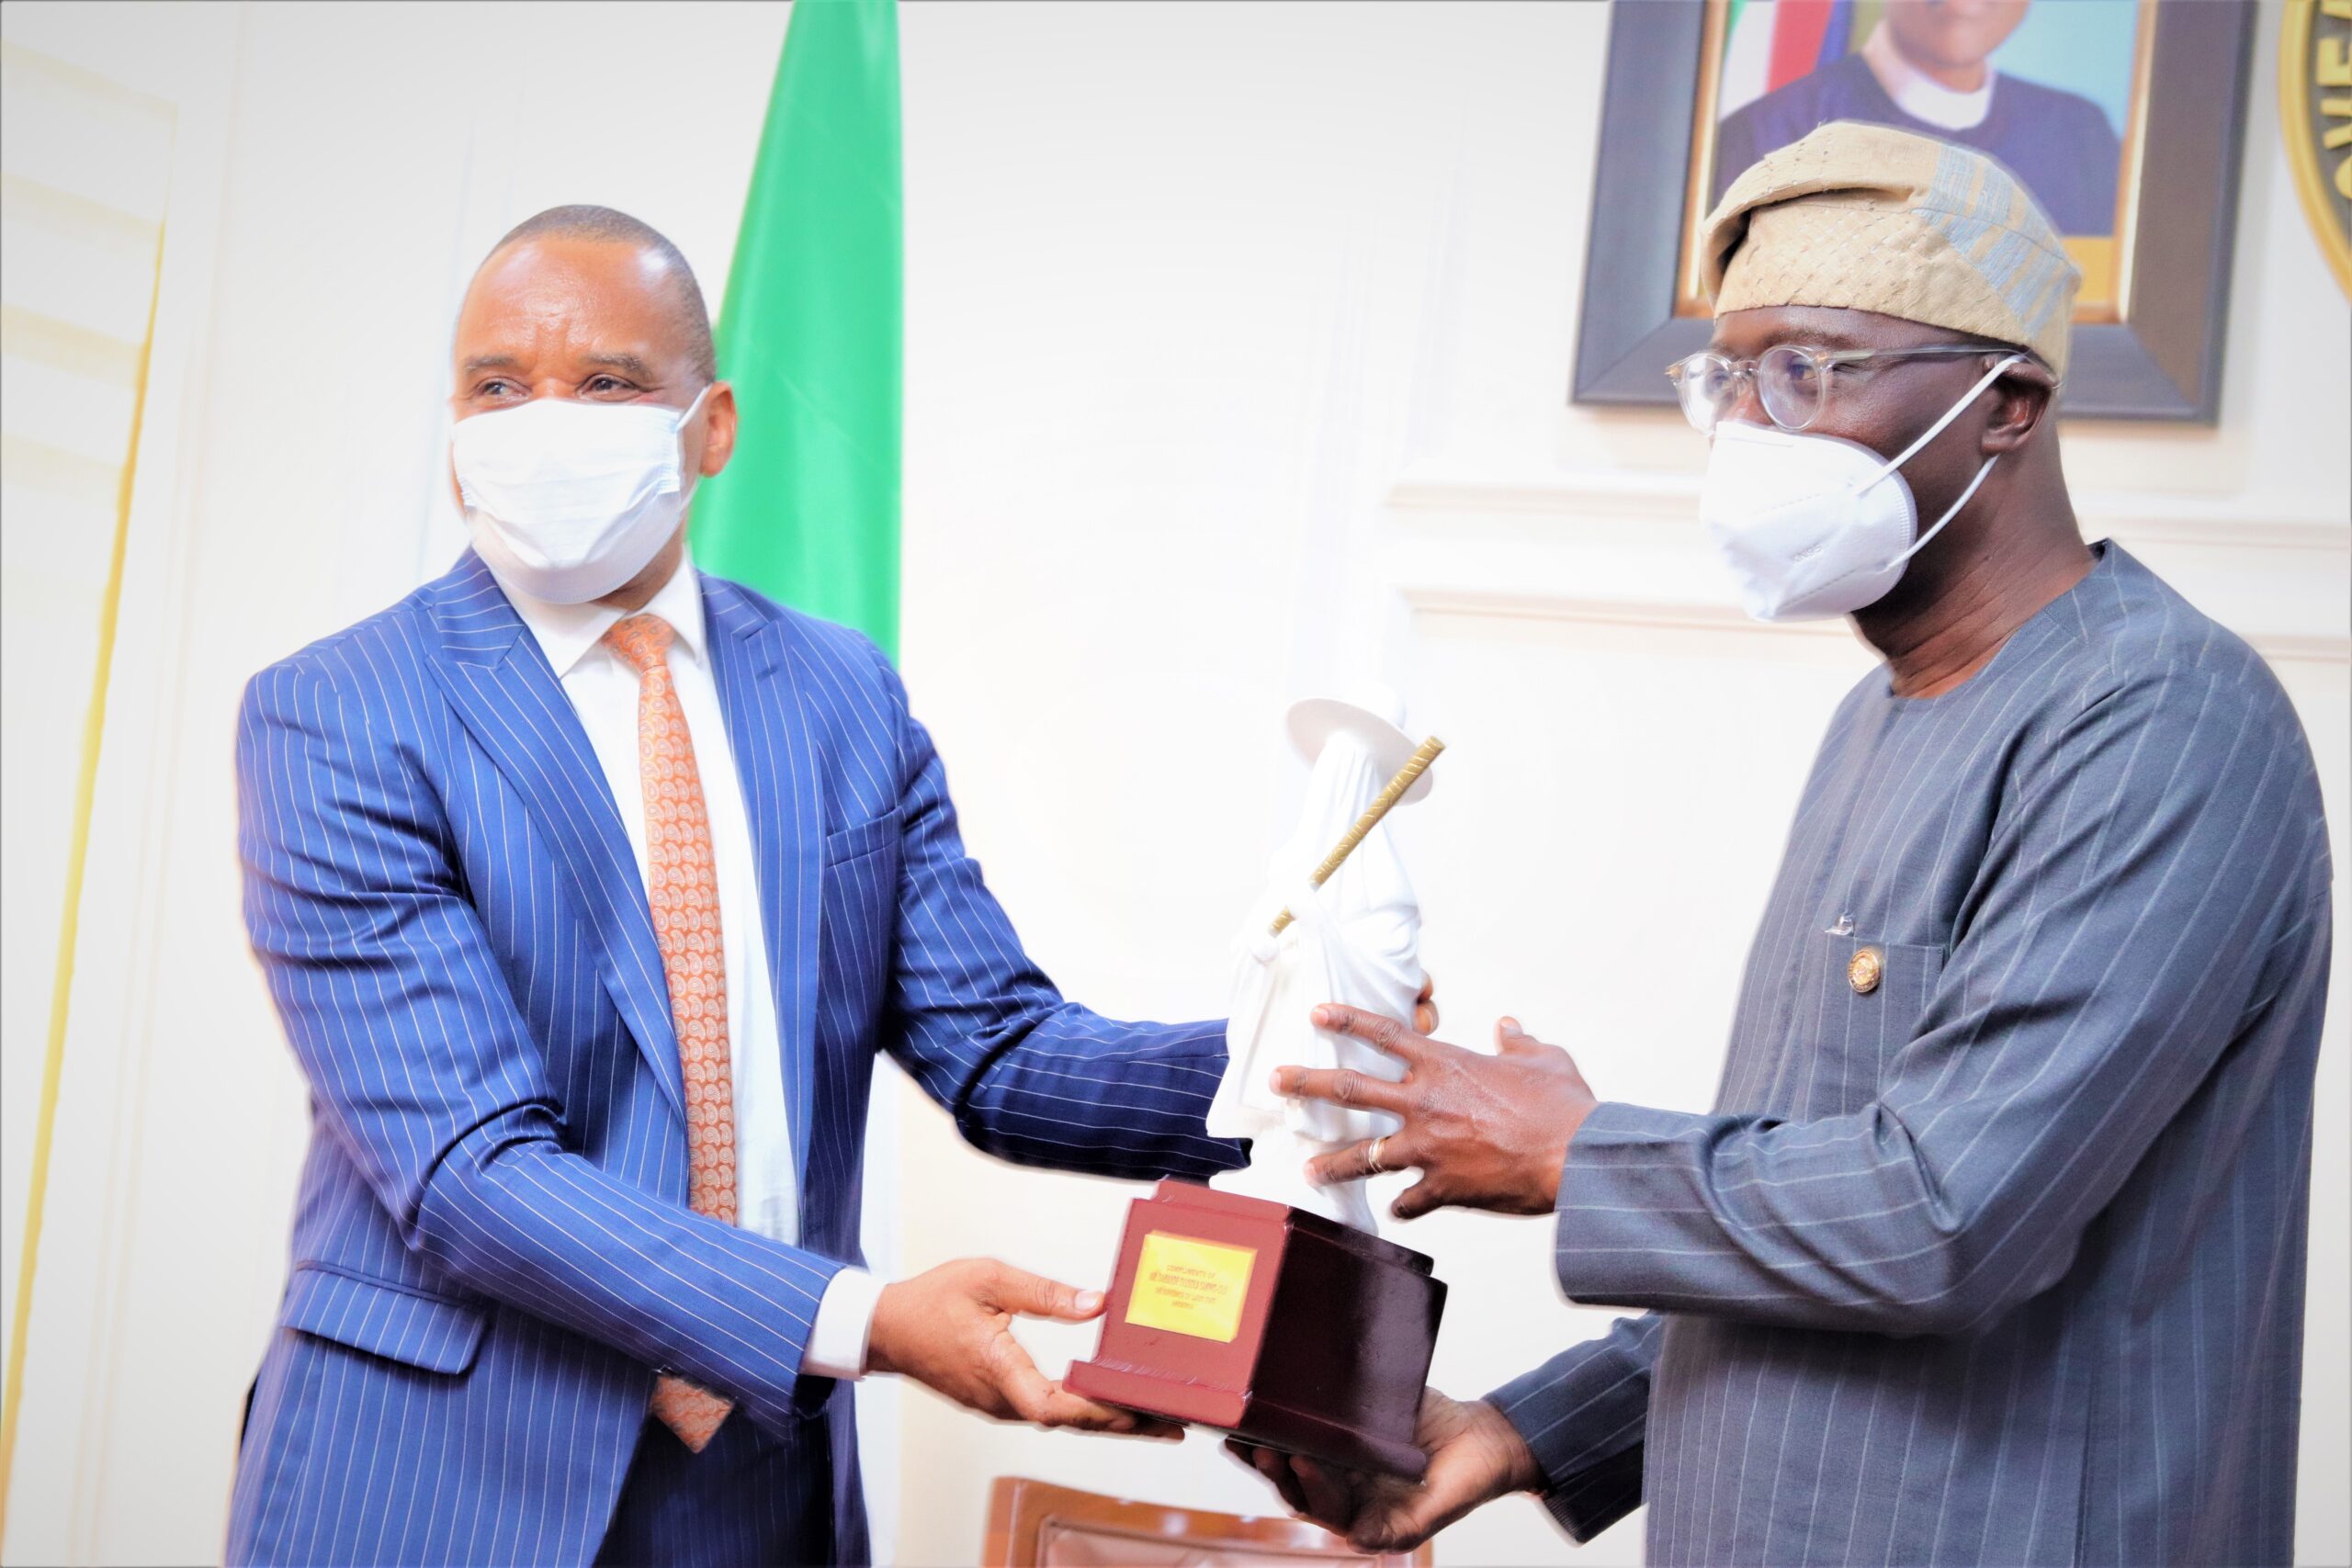 Dr. Bashir Jamoh’s Courtesy Call To the Lagos State Governor